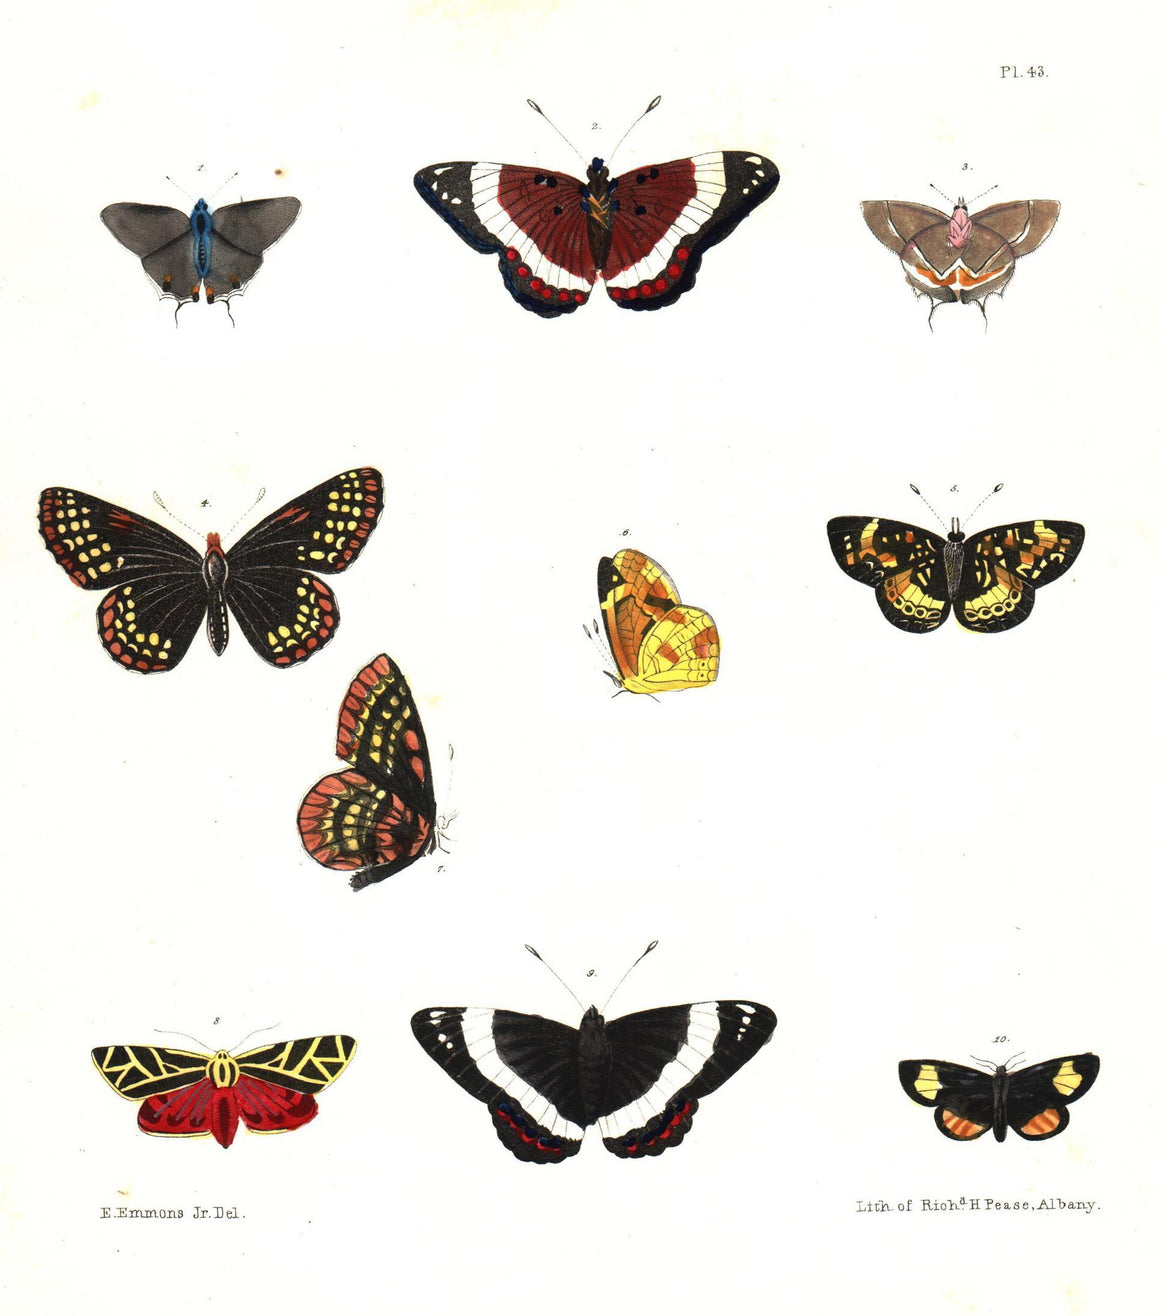 1854 Plate 43 - Admiral Butterfly - Emmons